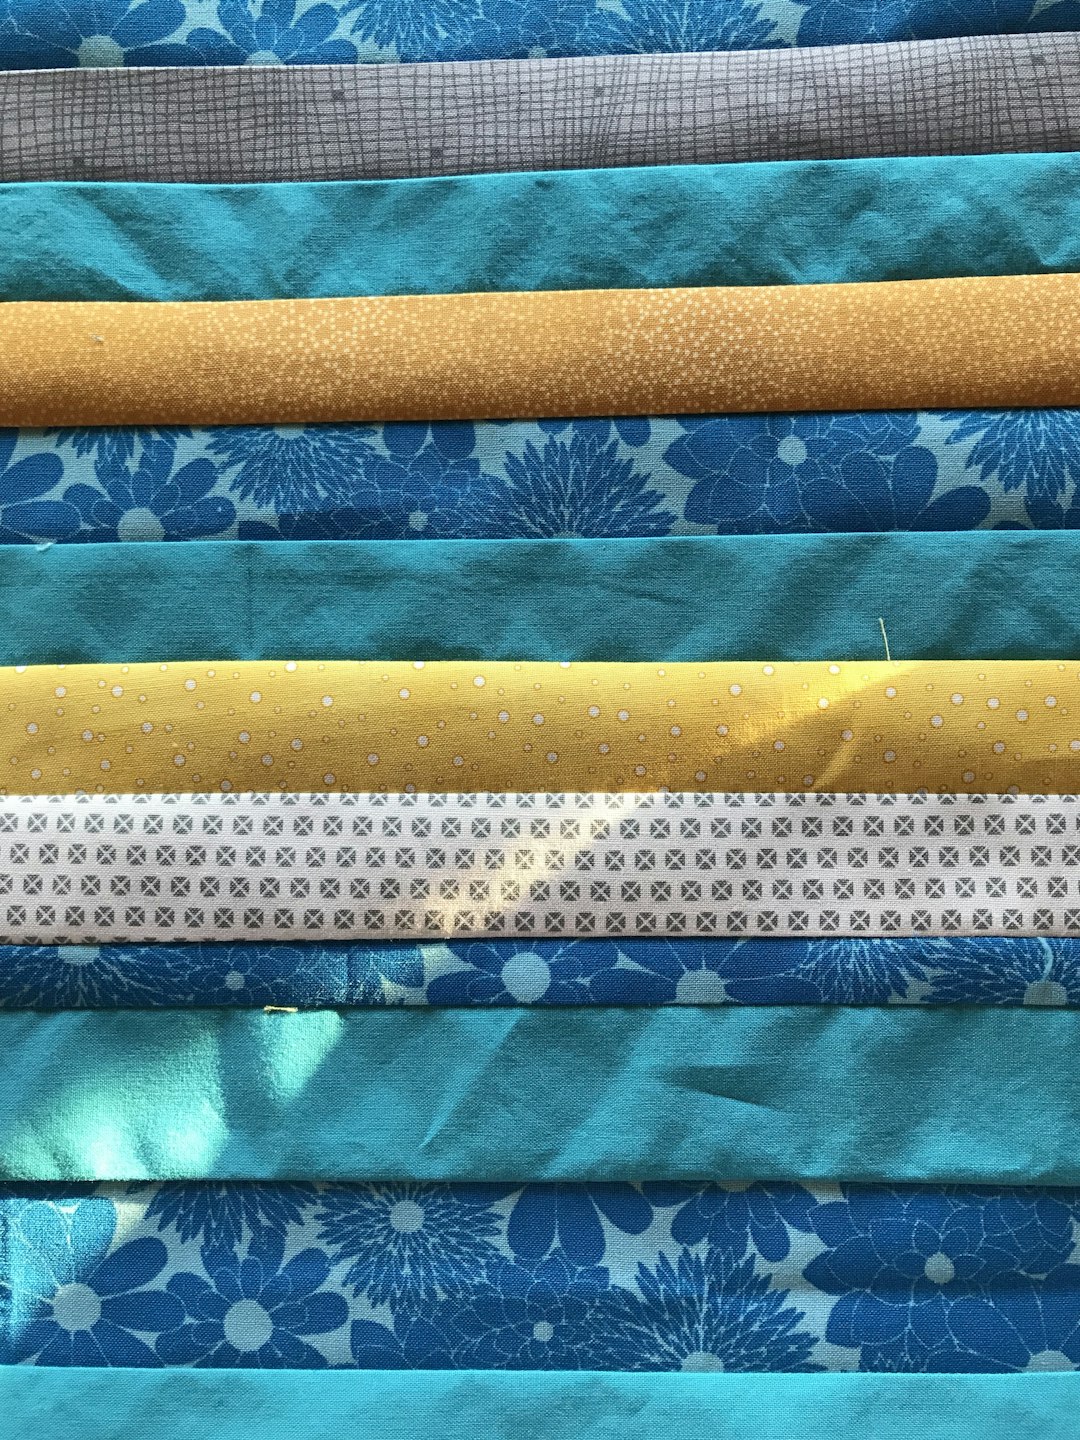 Tips for Quilting with Different Fabrics